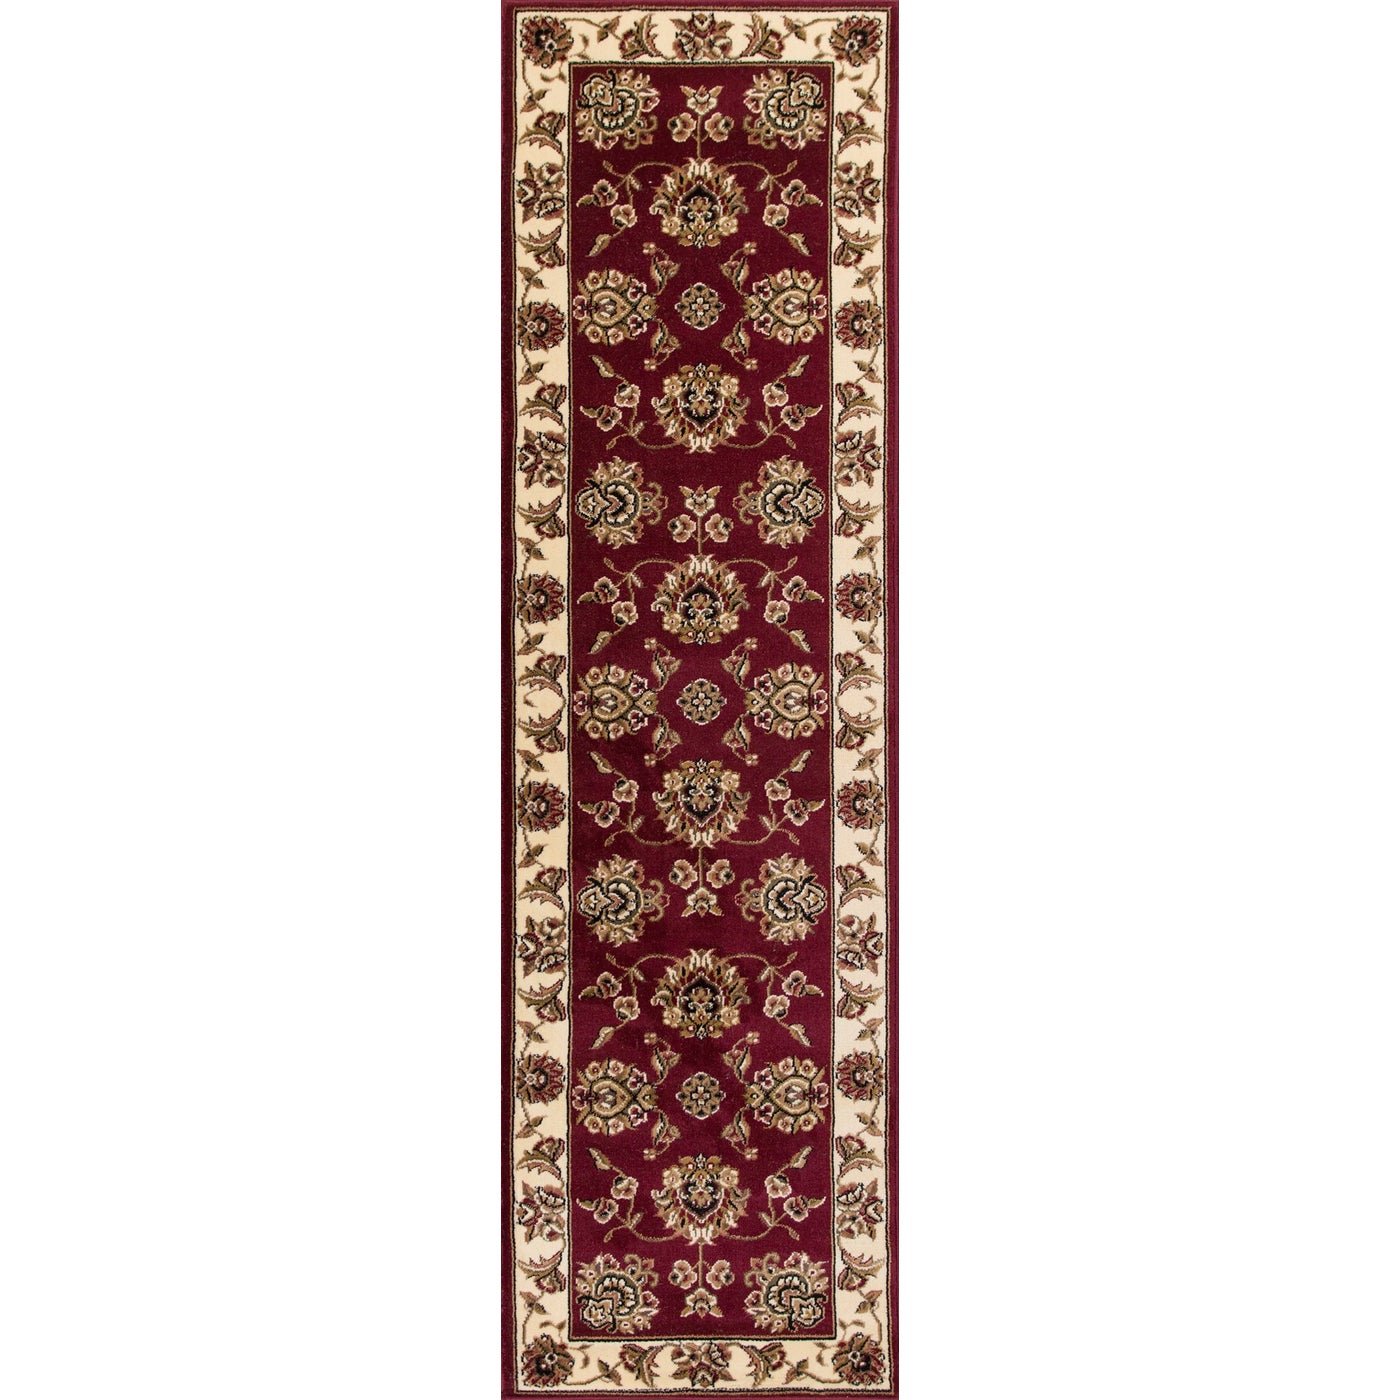 Cambridge 7340 Floral Mahal Red/Ivory Rug - Baconco